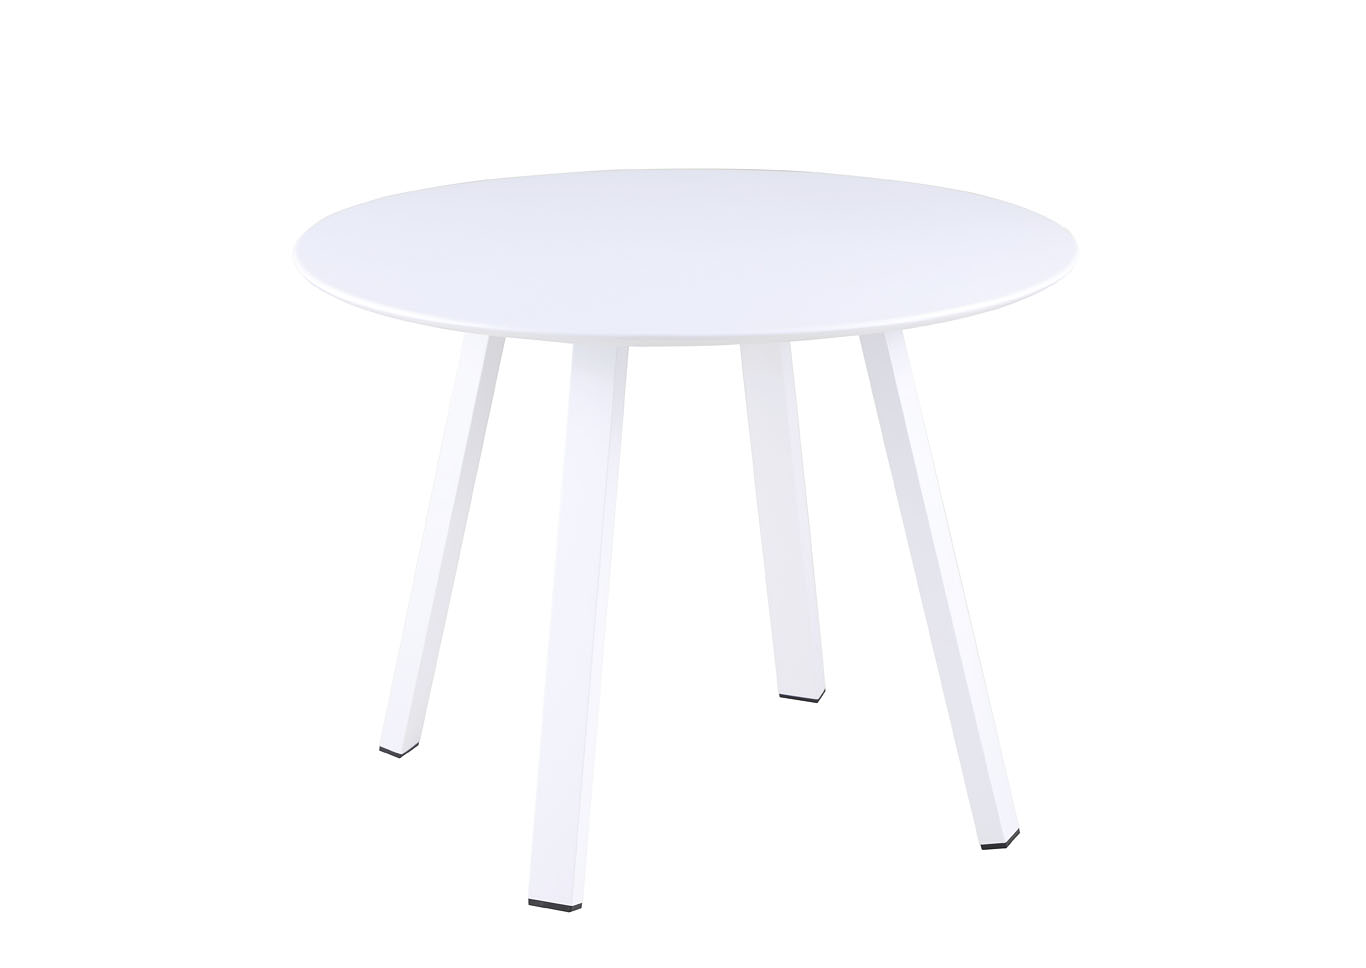 Ventura Matte White Round Outdoor Aluminum Table,Chintaly Imports